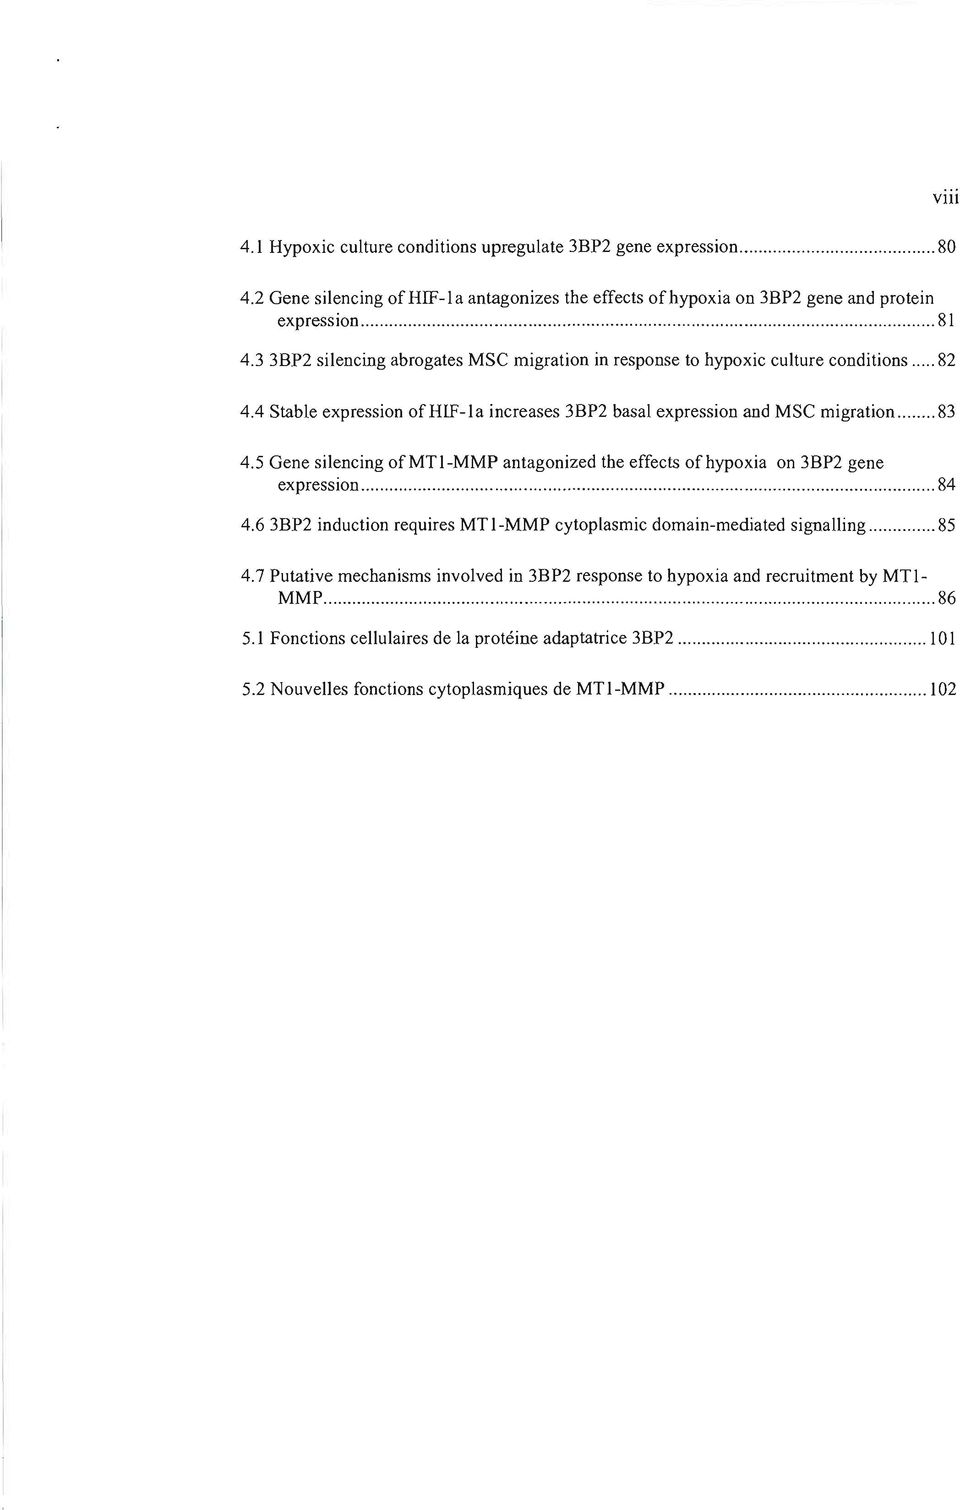 5 Gene silencing ofmtl-mmp antagonized the effects ofhypoxia on 3BP2 gene expression 84 4.6 3BP2 induction requires MTl-MMP cytoplasmic domain-mediated signalling 85 4.